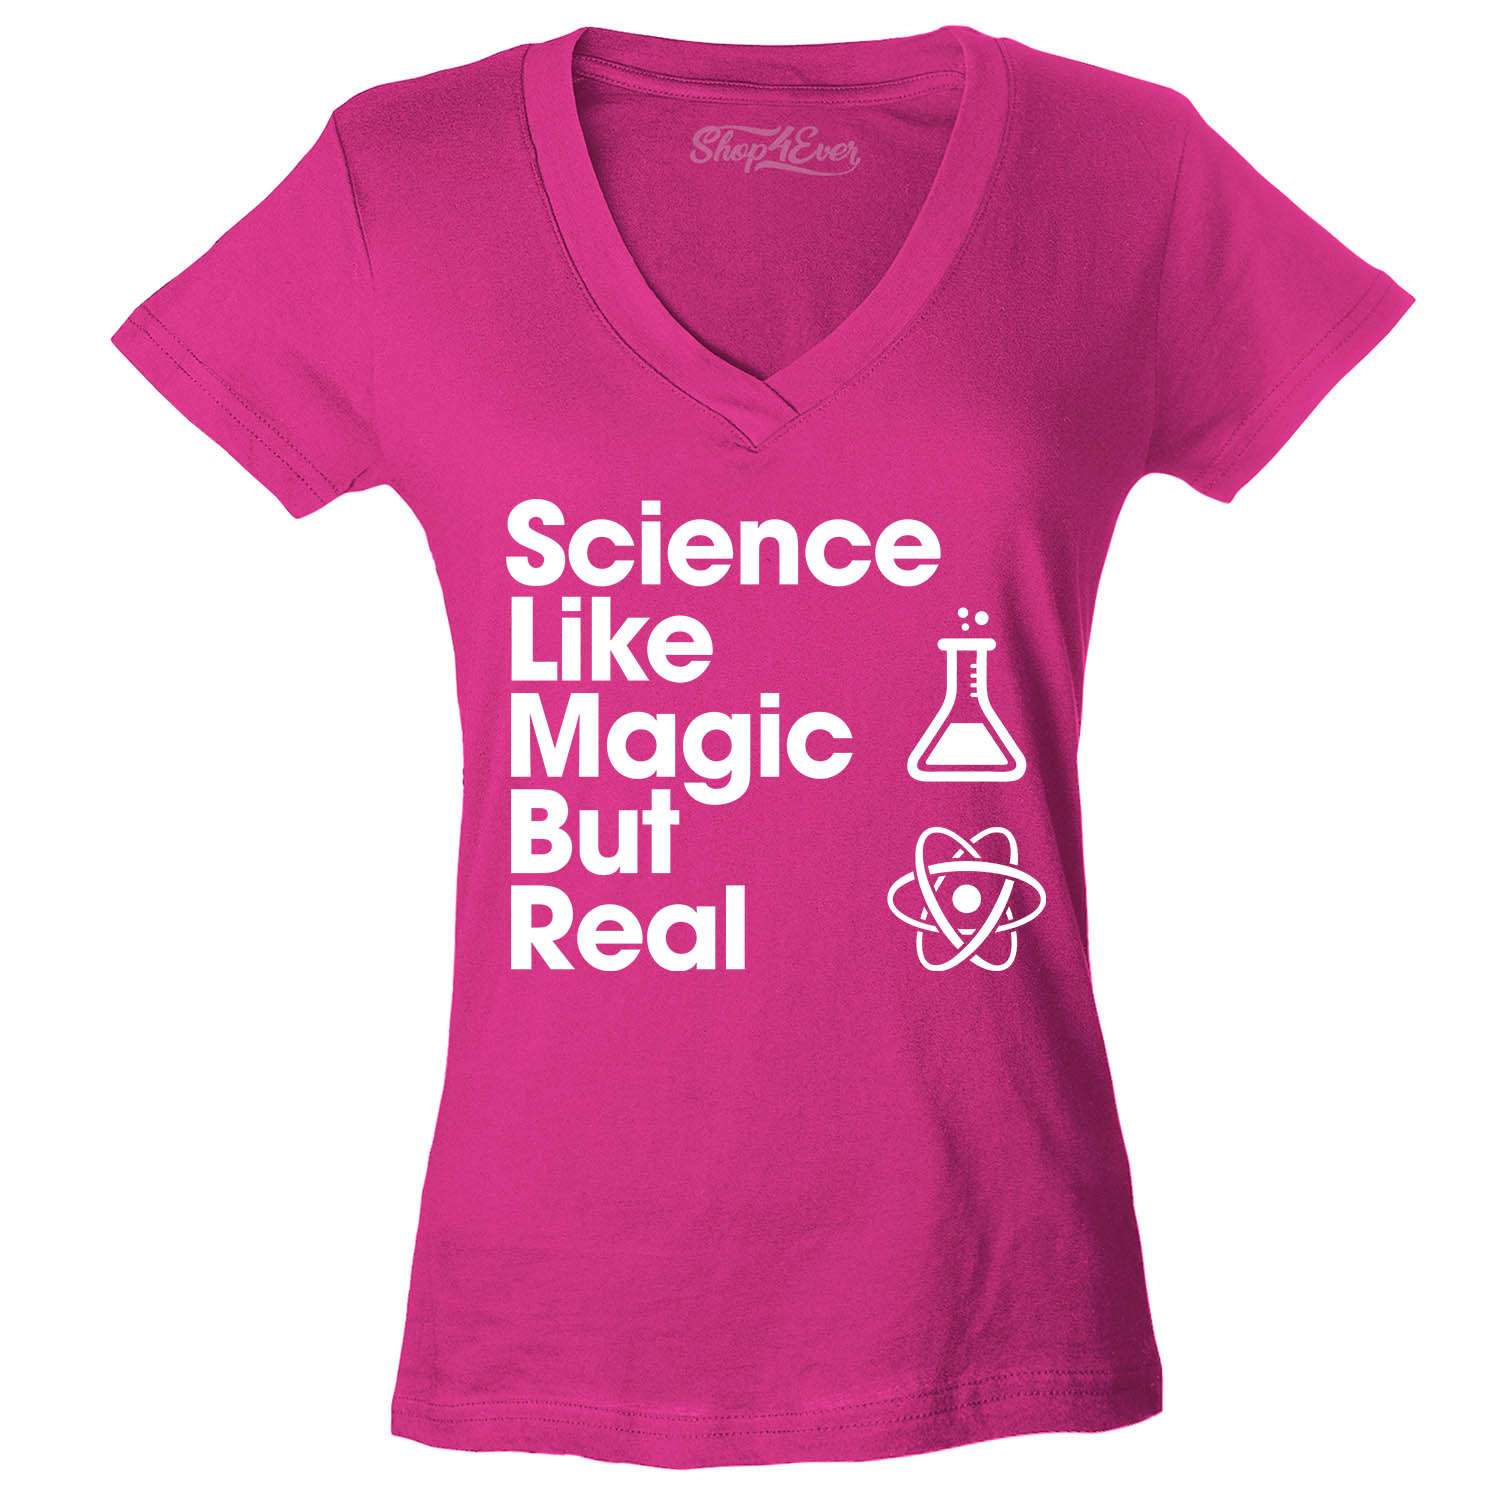 Science It's Like Magic But Real Women's V-Neck T-Shirt Funny Gift 